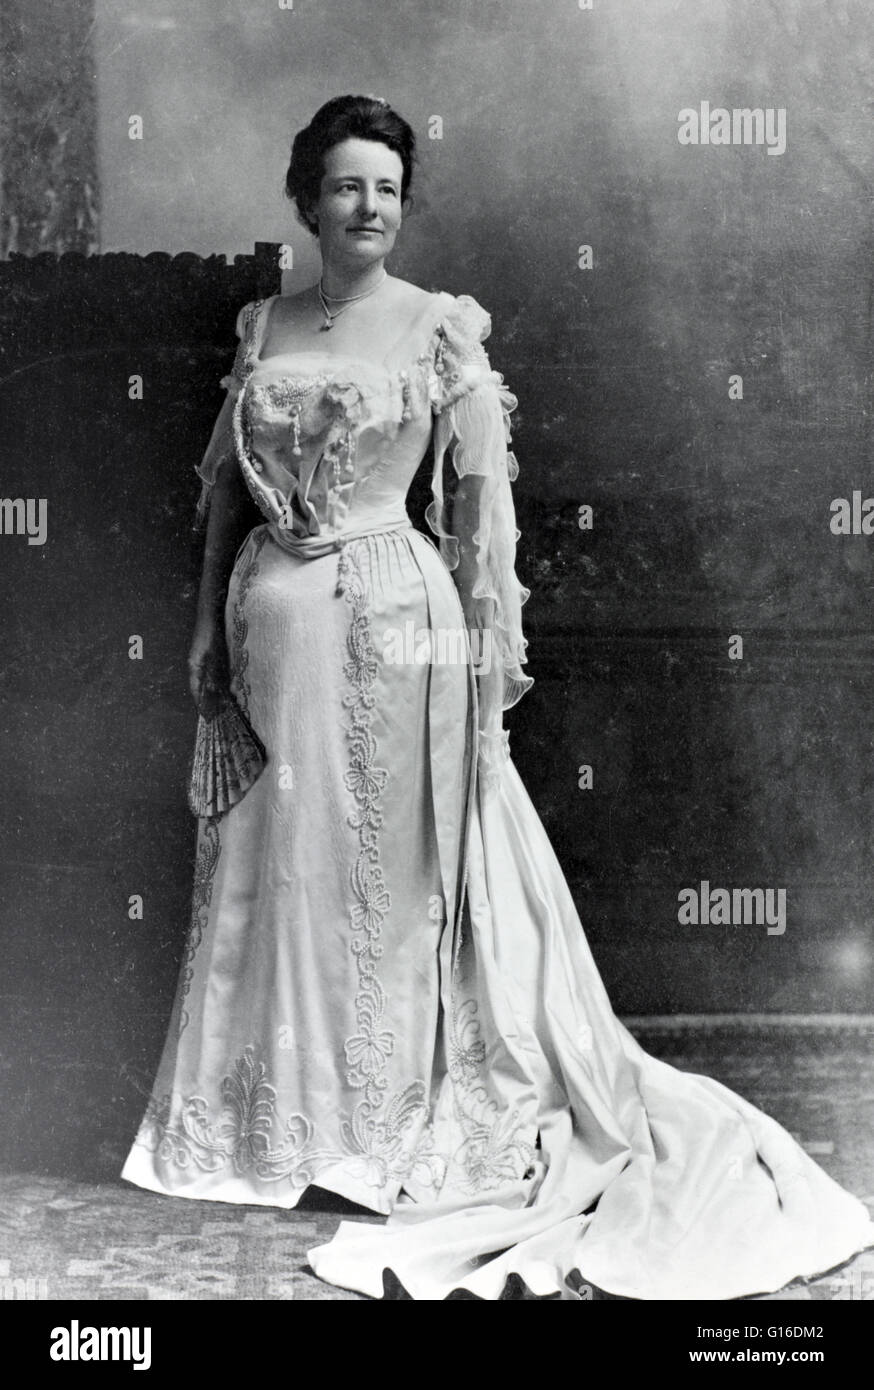 Edith Kermit Carow Roosevelt (August 6, 1861 - September 30, 1948) was the second wife of President Theodore Roosevelt and served as First Lady of the U.S. during his presidency from 1901 to 1909. Edith grew up next to Theodore Roosevelt and was his first Stock Photo